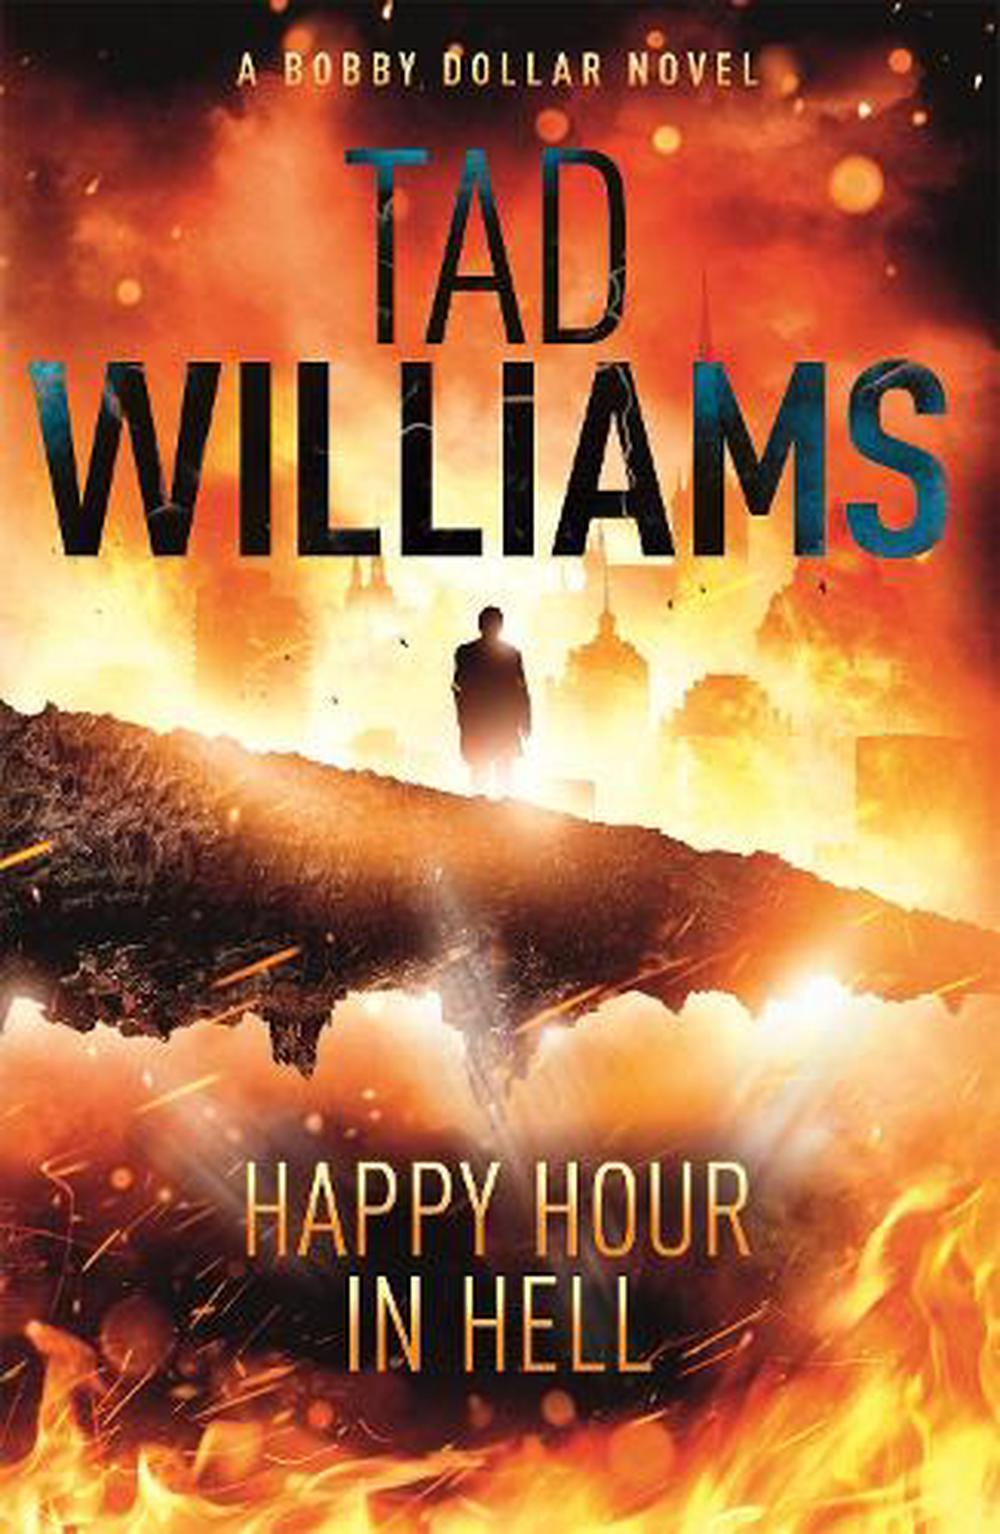 Happy Hour in Hell: Bobby Dollar 2 by Tad Williams (English) Paperback ...